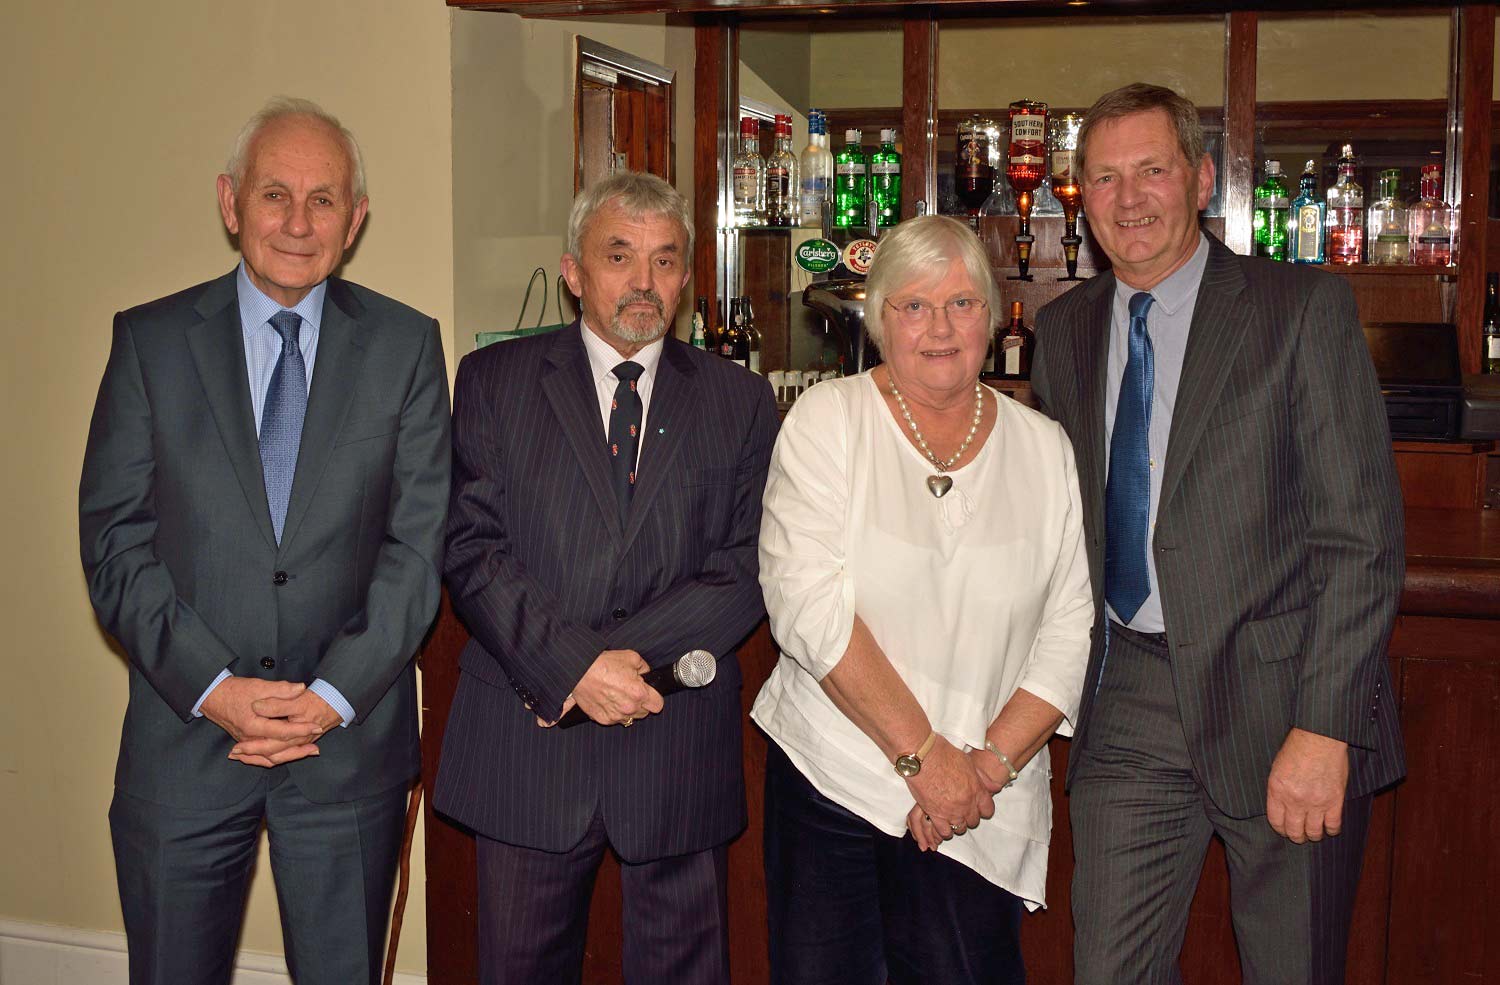 Tockwith Committee and Friends Dinner are former chairman Mike Tham, new chairman Allan Robinson, show president Dee Alton and former chairman Sam Blacker